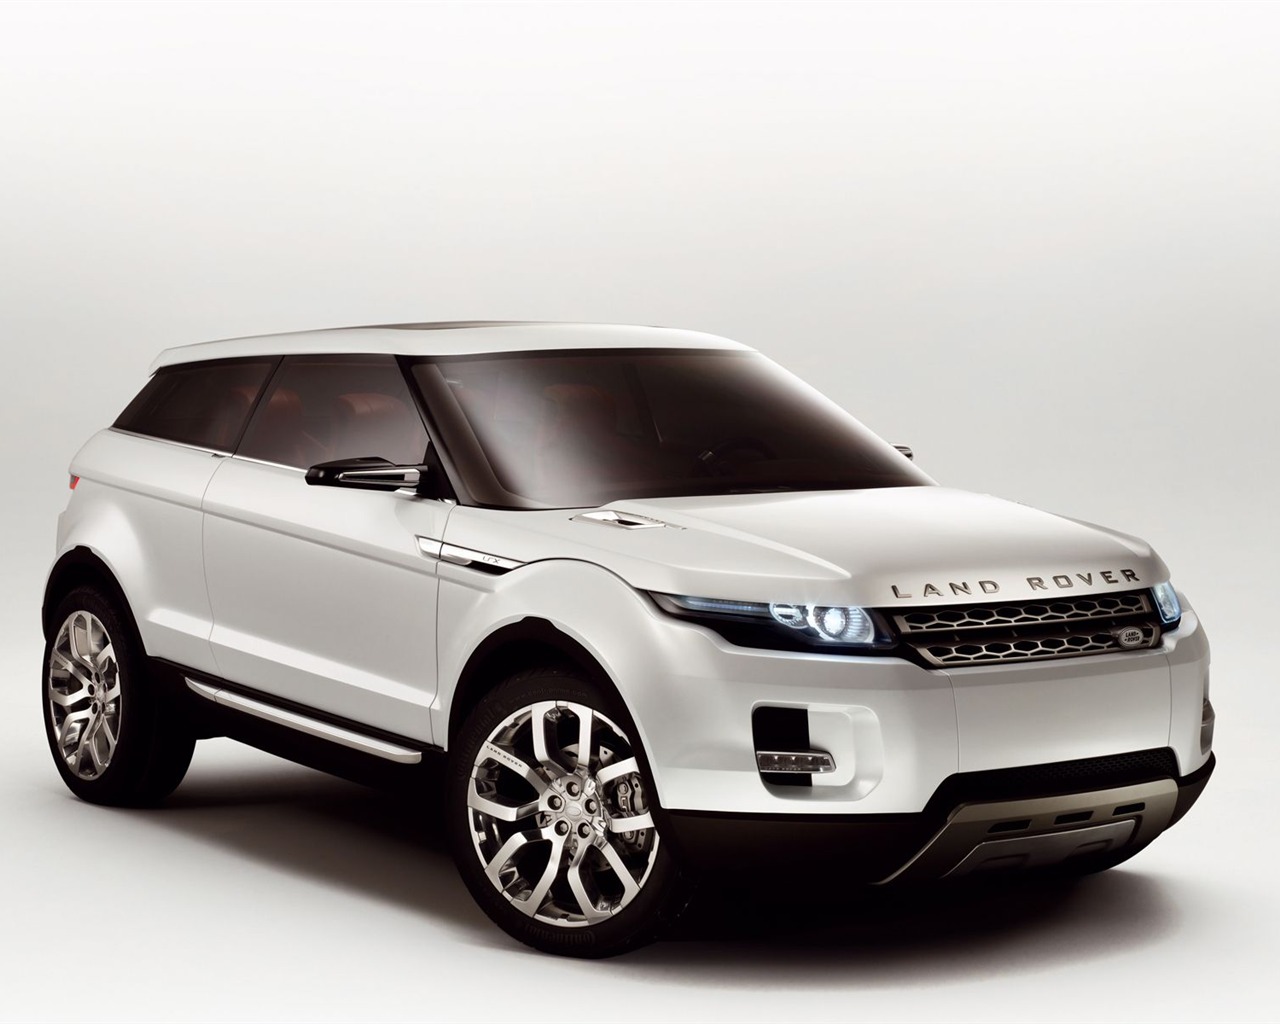 Land Rover wallpapers 2011 (1) #11 - 1280x1024